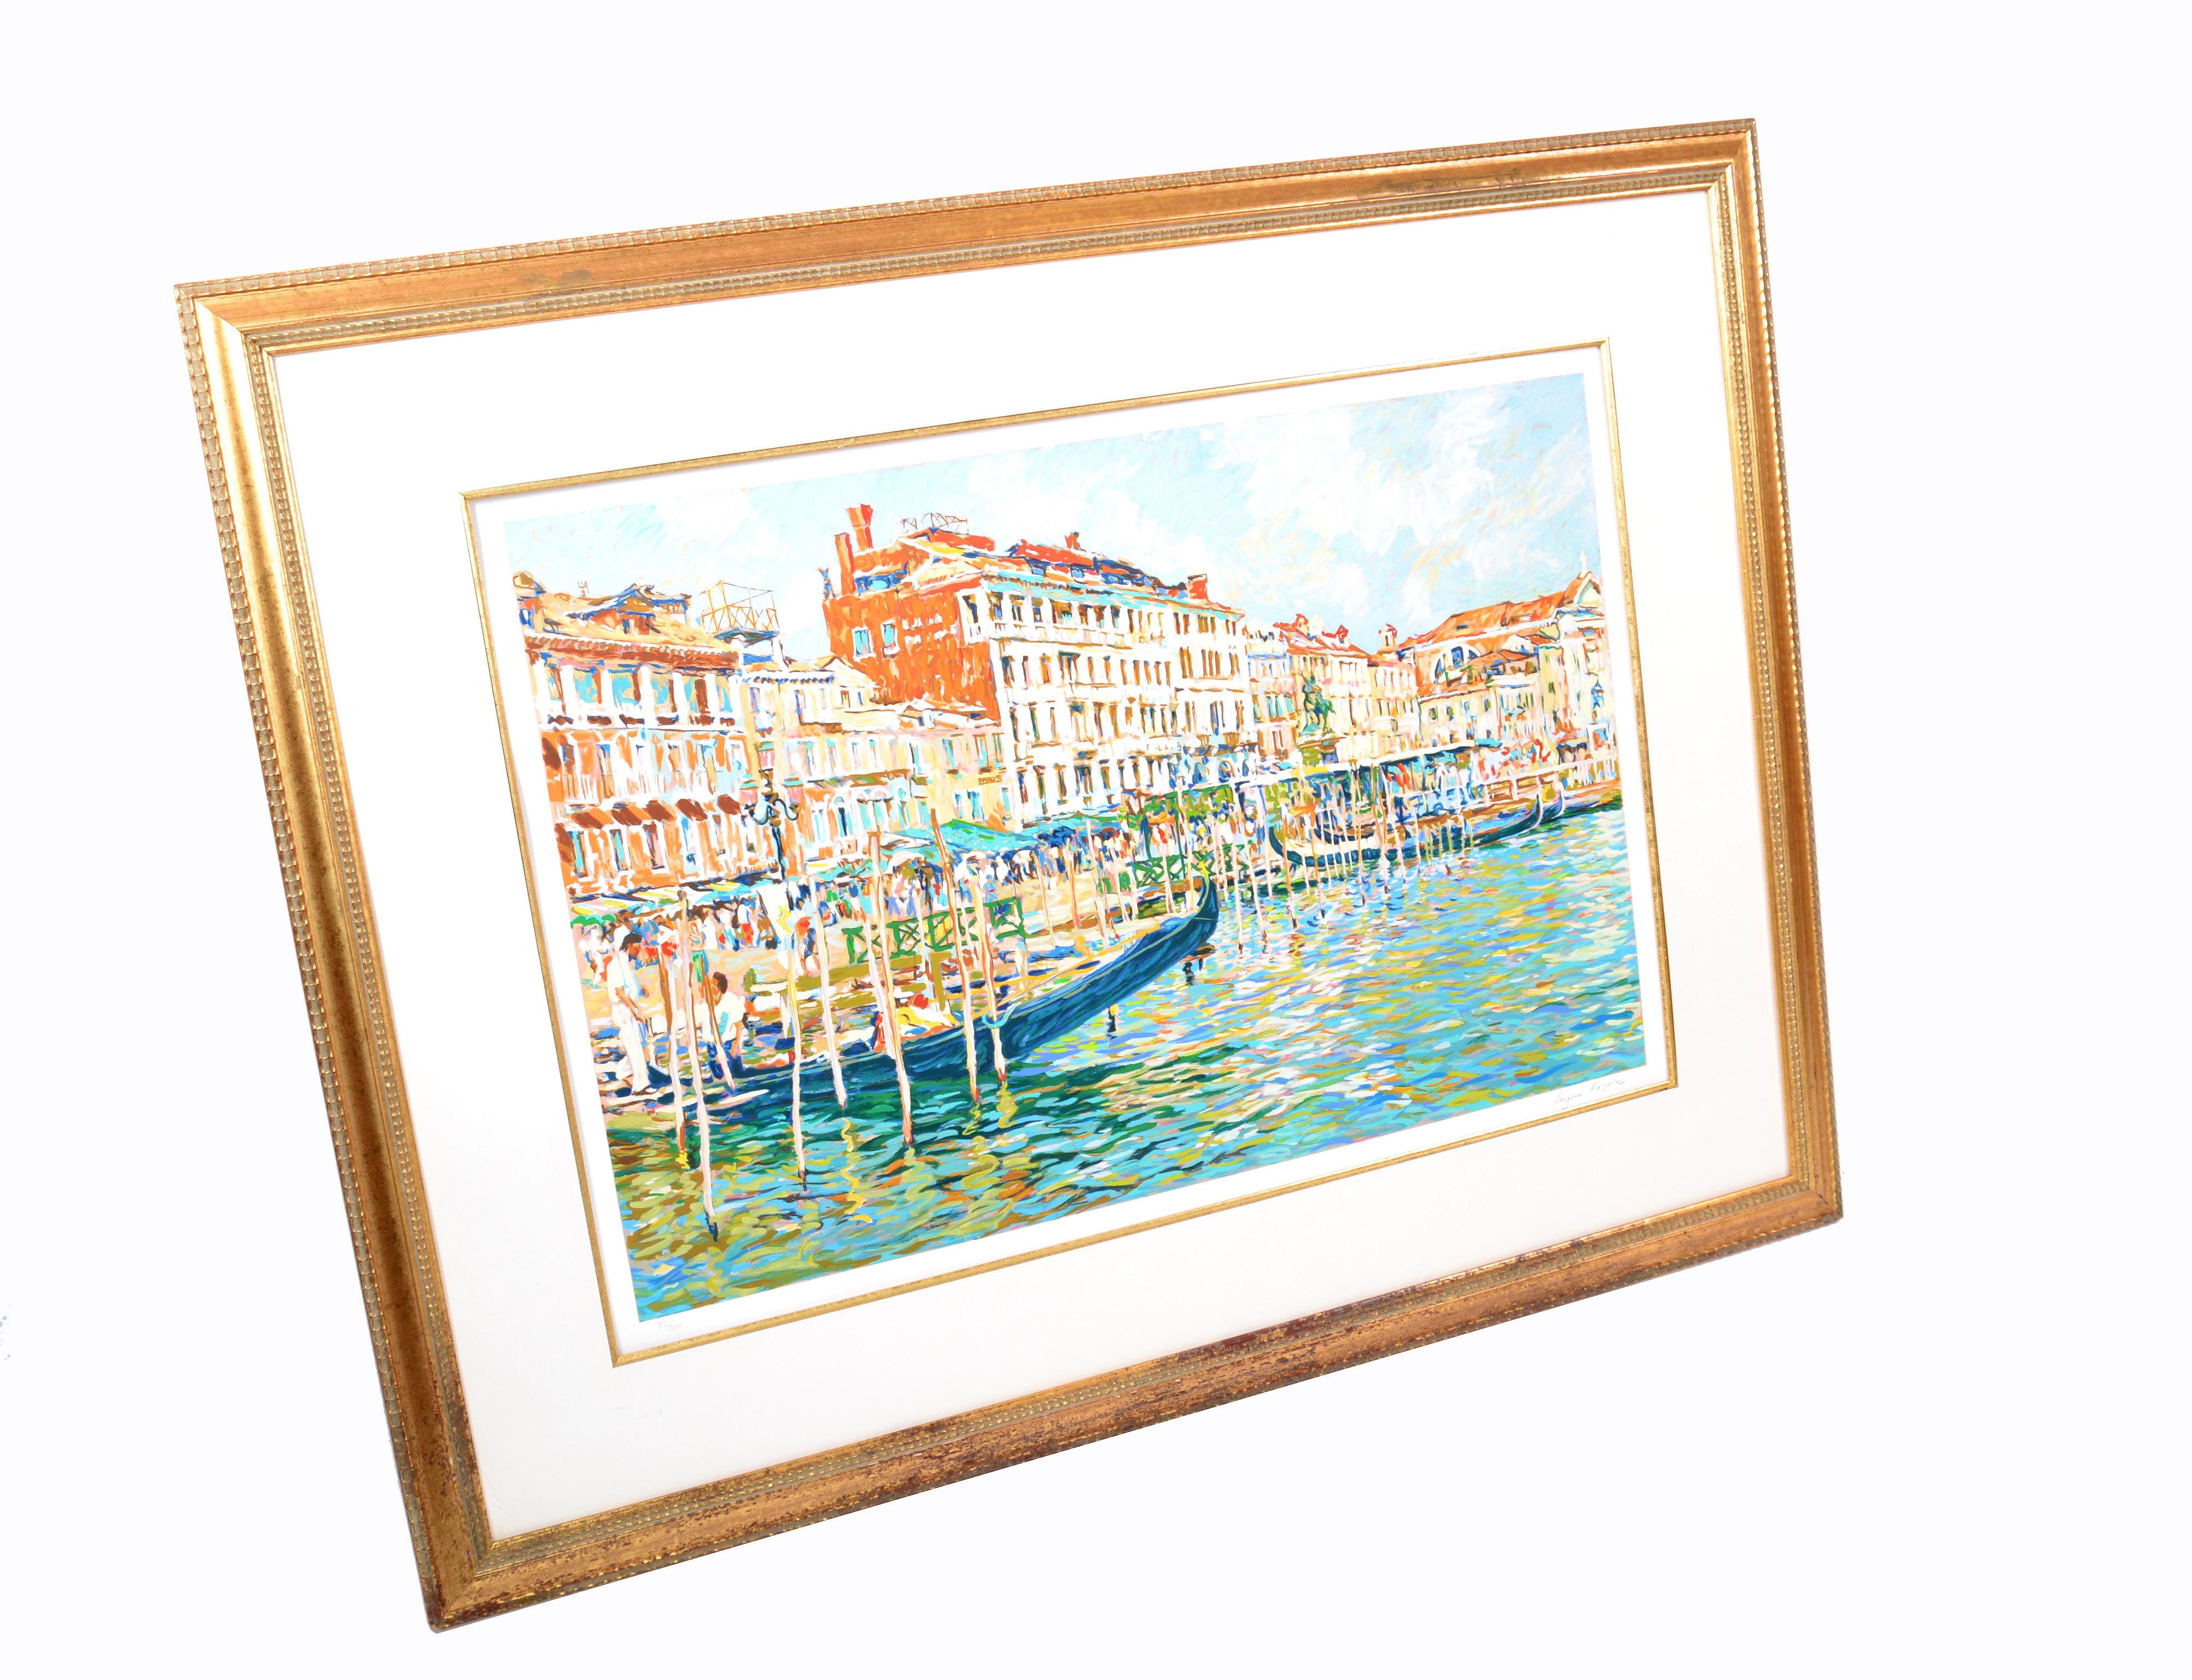 Eugene Kaspin Contemporary Impressionism acrylic on paper Print depicting serene gondola rides in Venice, Italy.
It has a glass cover and comes with a gold finished wood frame.
Marked, Eugene Kaspin and numbered 52/300.
The colors are amazing and